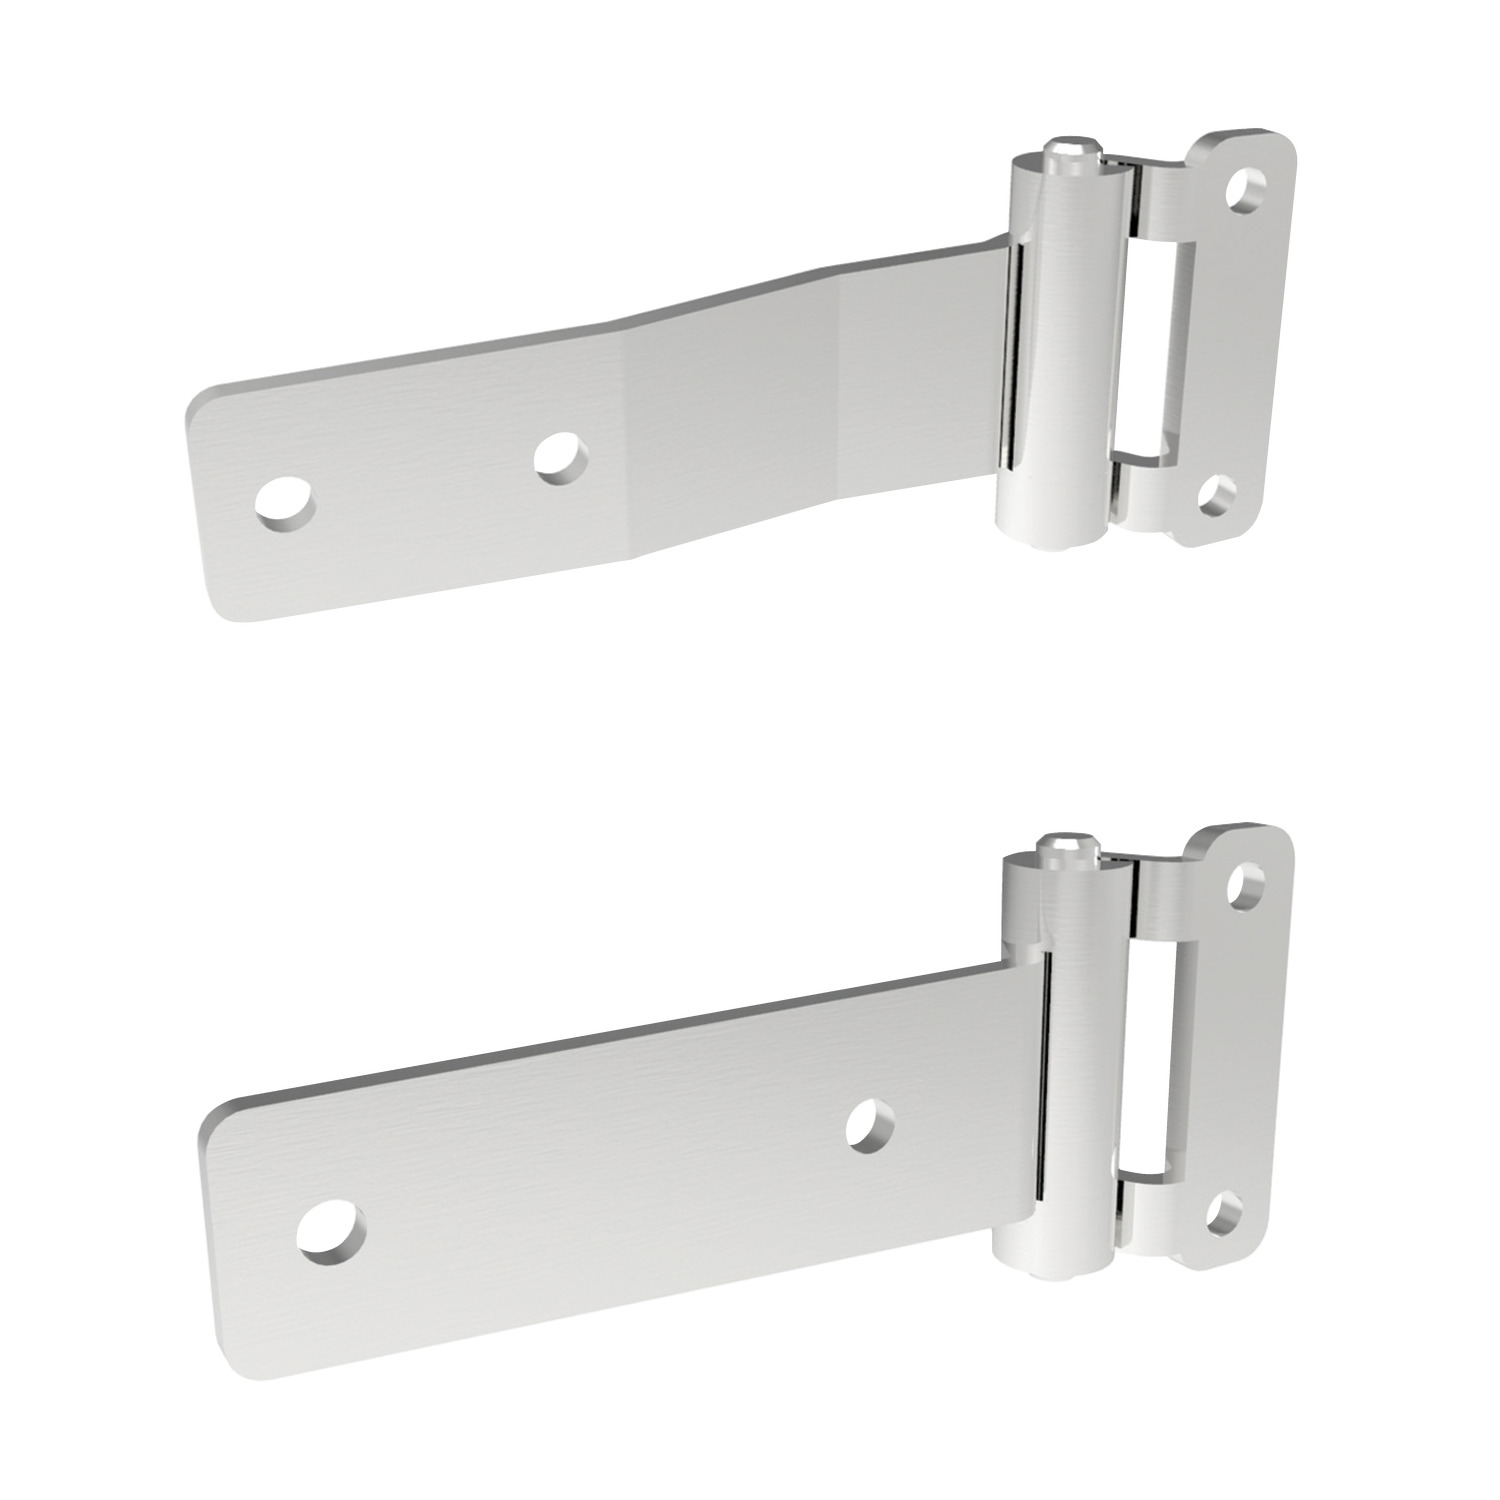 Surface Mount - Leaf Hinges Screw mount surface leaf hinges made from polished stainless steel (AISI 304). Open angle of 180°.